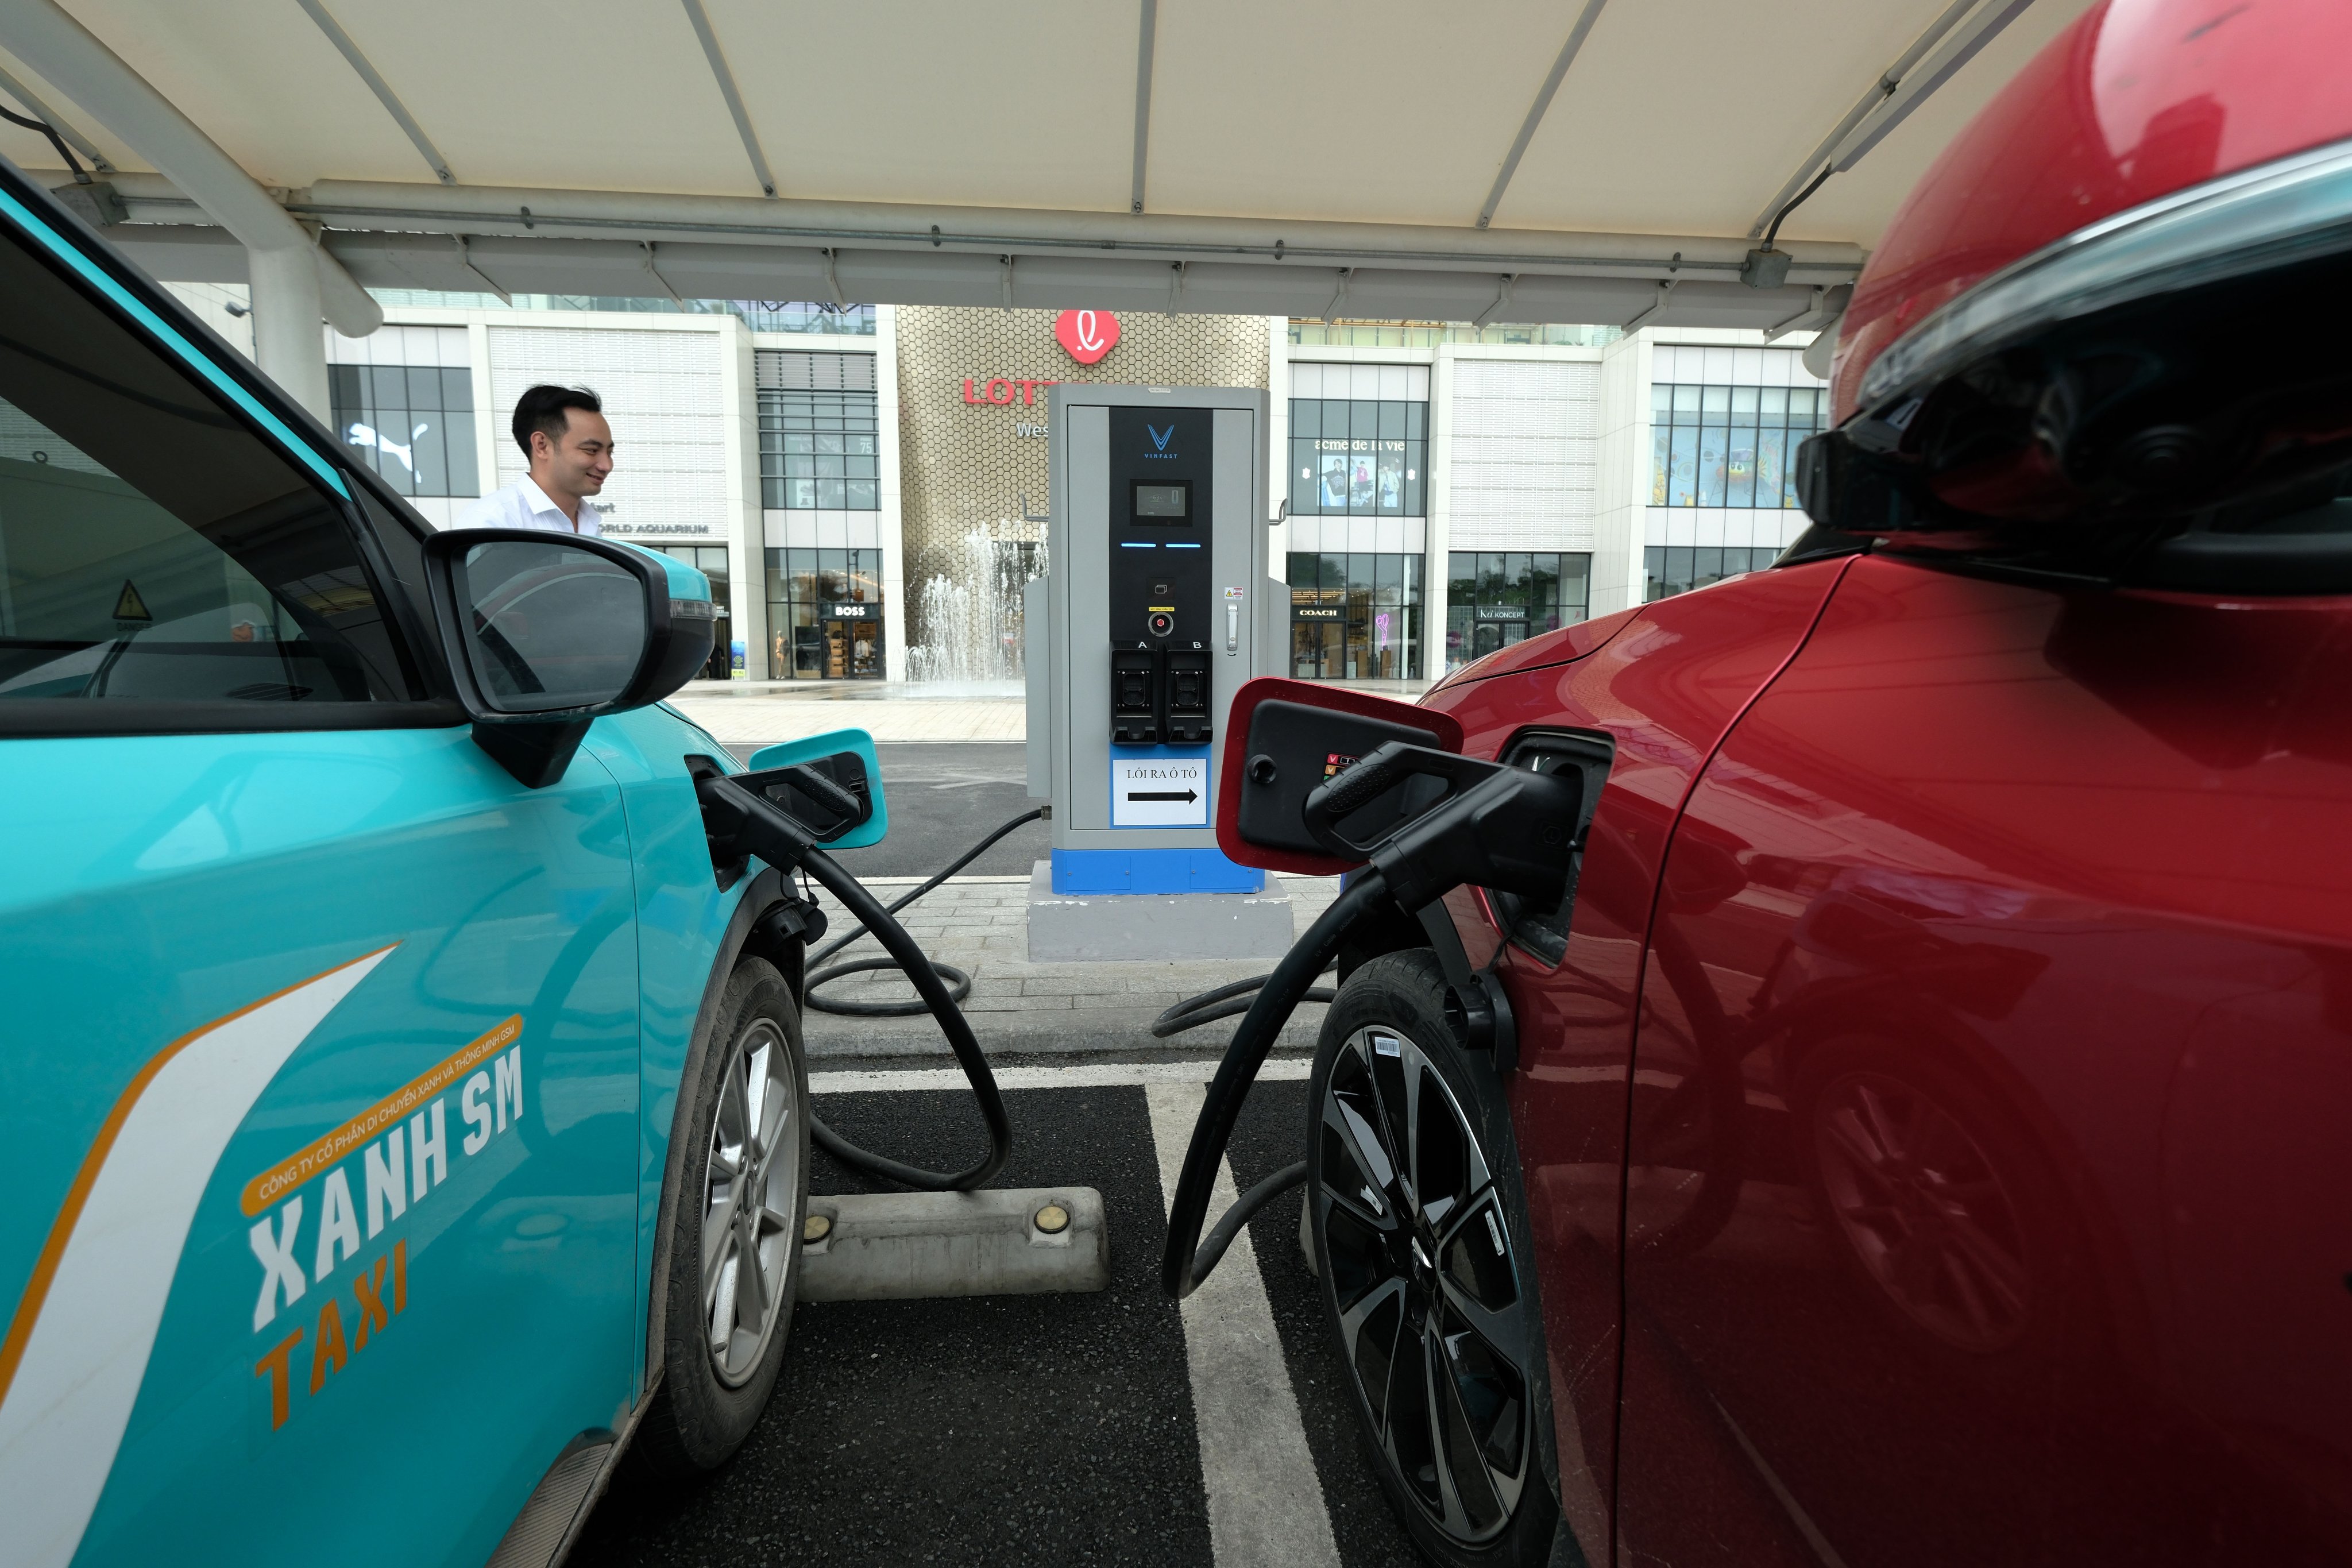 Cars recharge at an electric vehicle charging station in Hanoi on April 8. Asia must develop a skilled labour force capable of supporting its energy transition. Photo: EPA-EFE